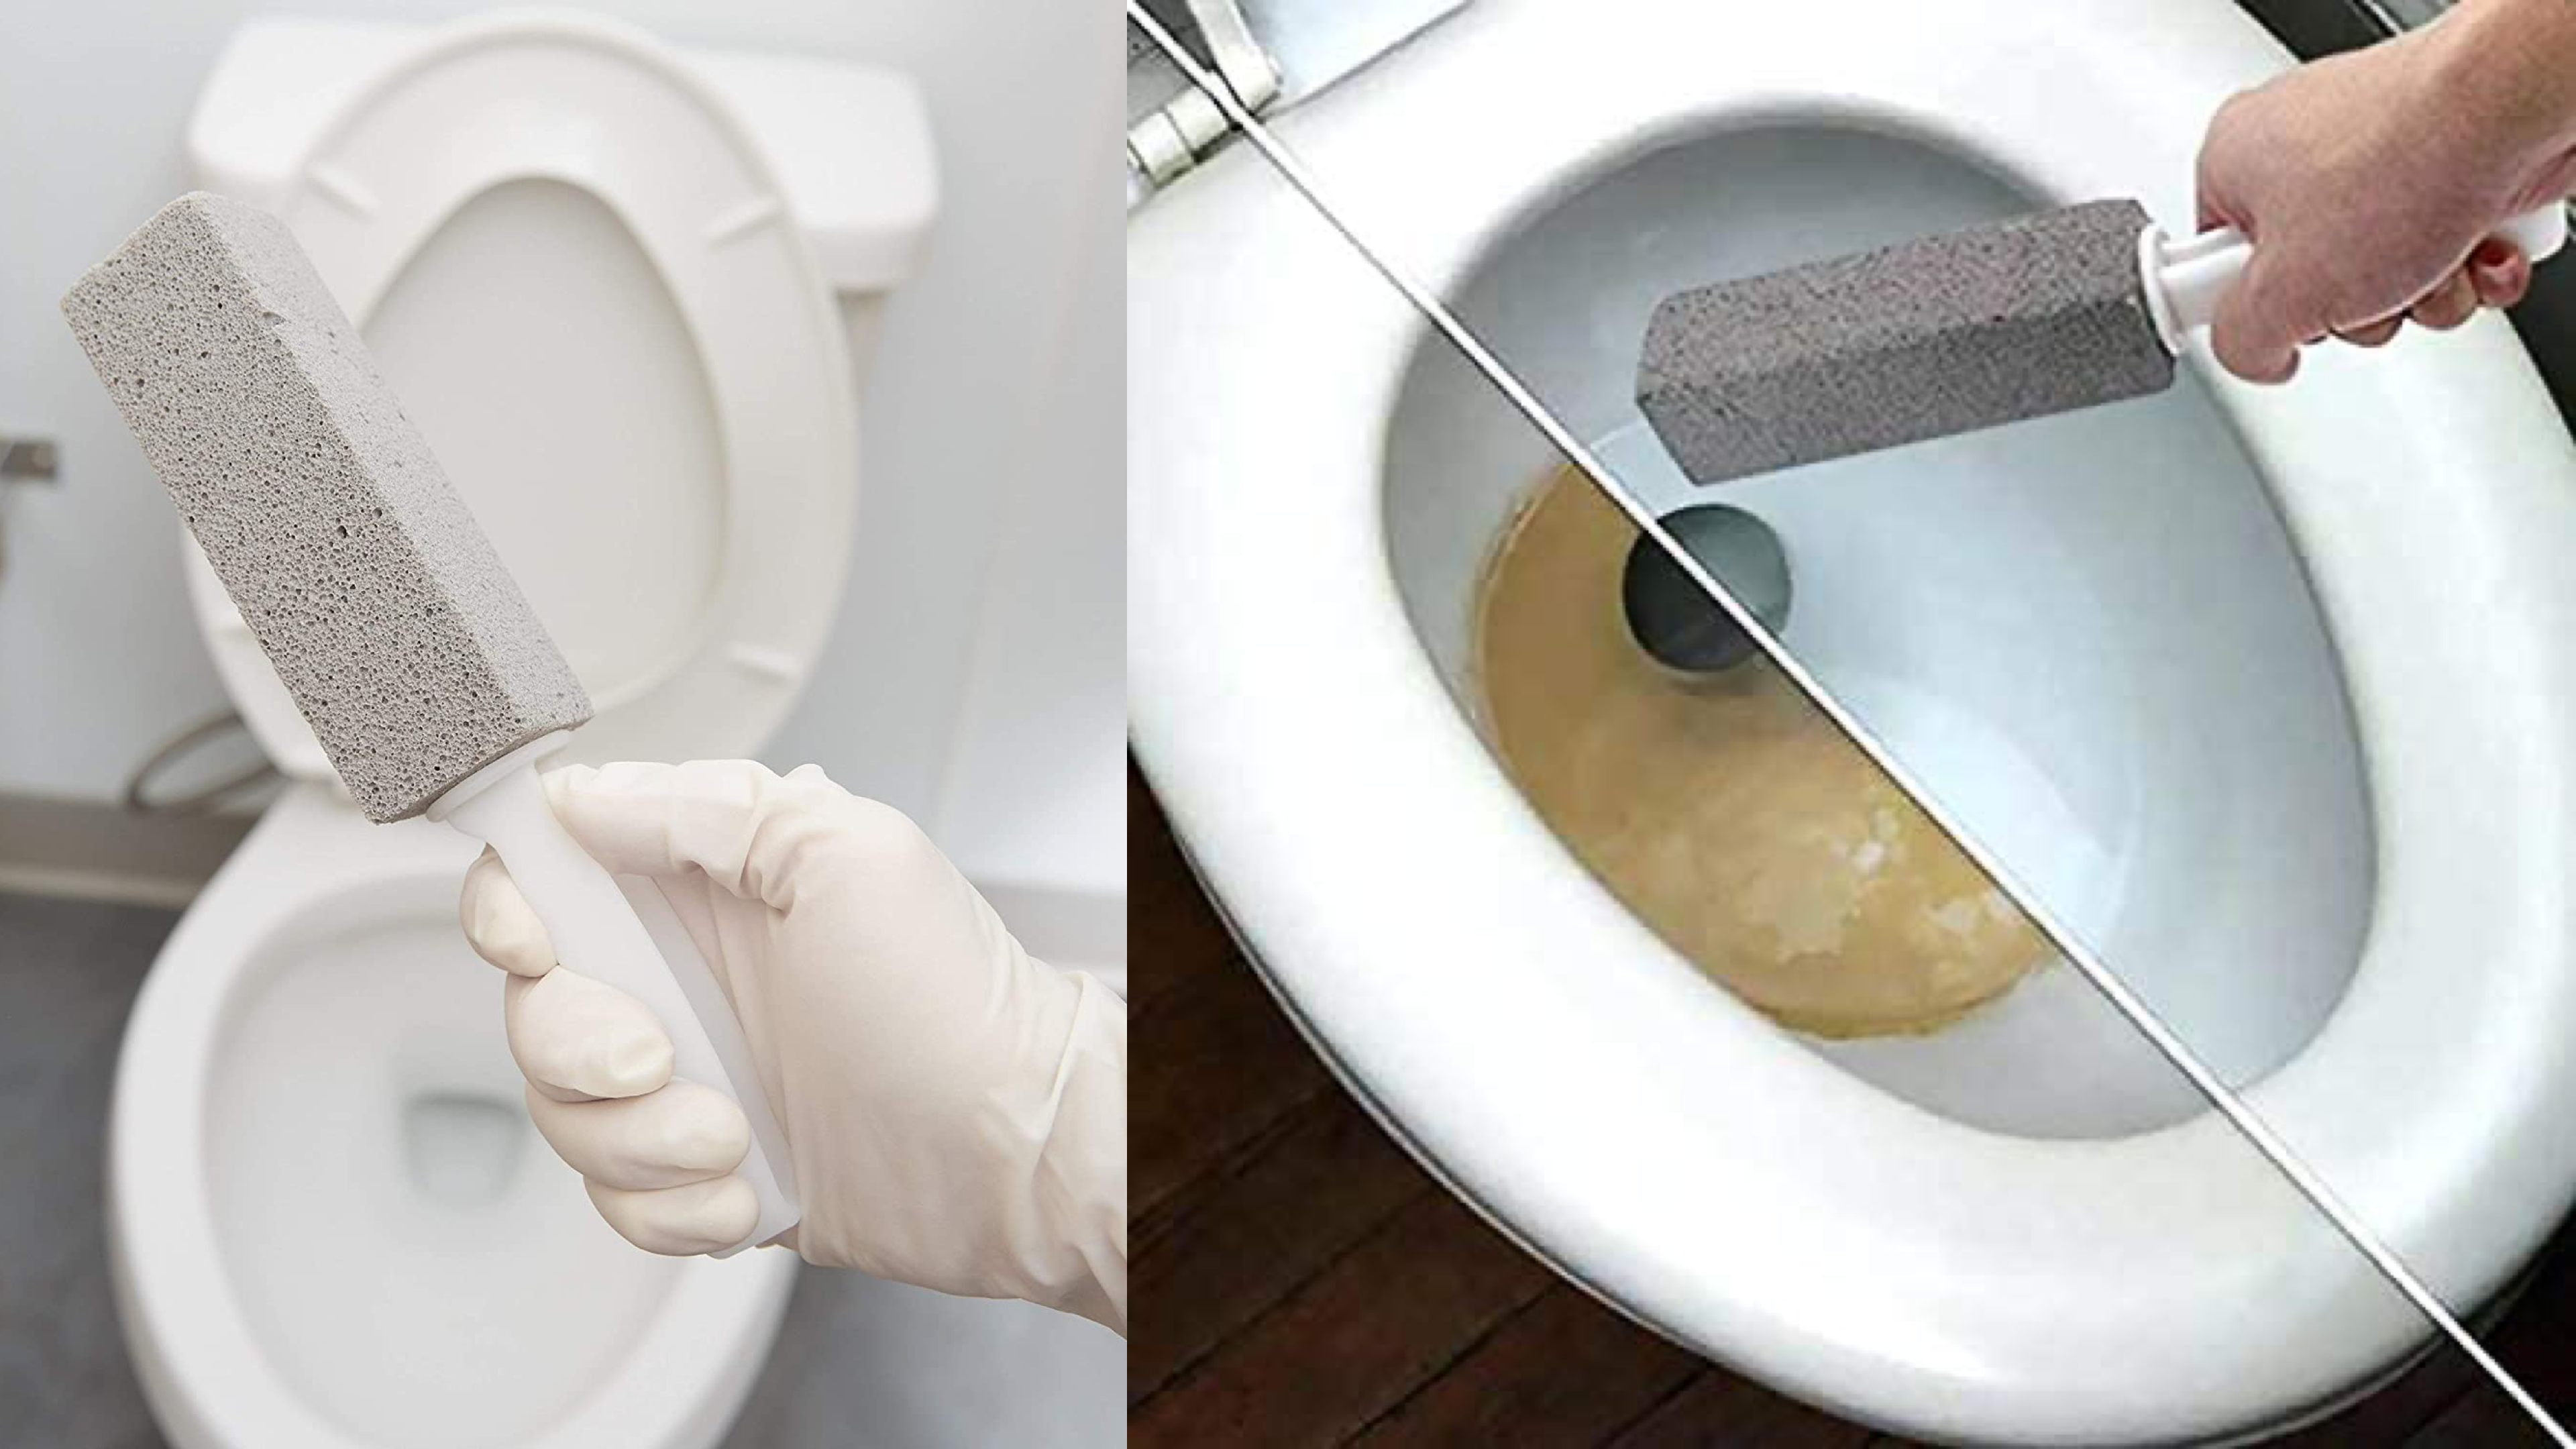 The 12 Best Toilet Cleaning Hacks That'll Make Your Bathroom Sparkle